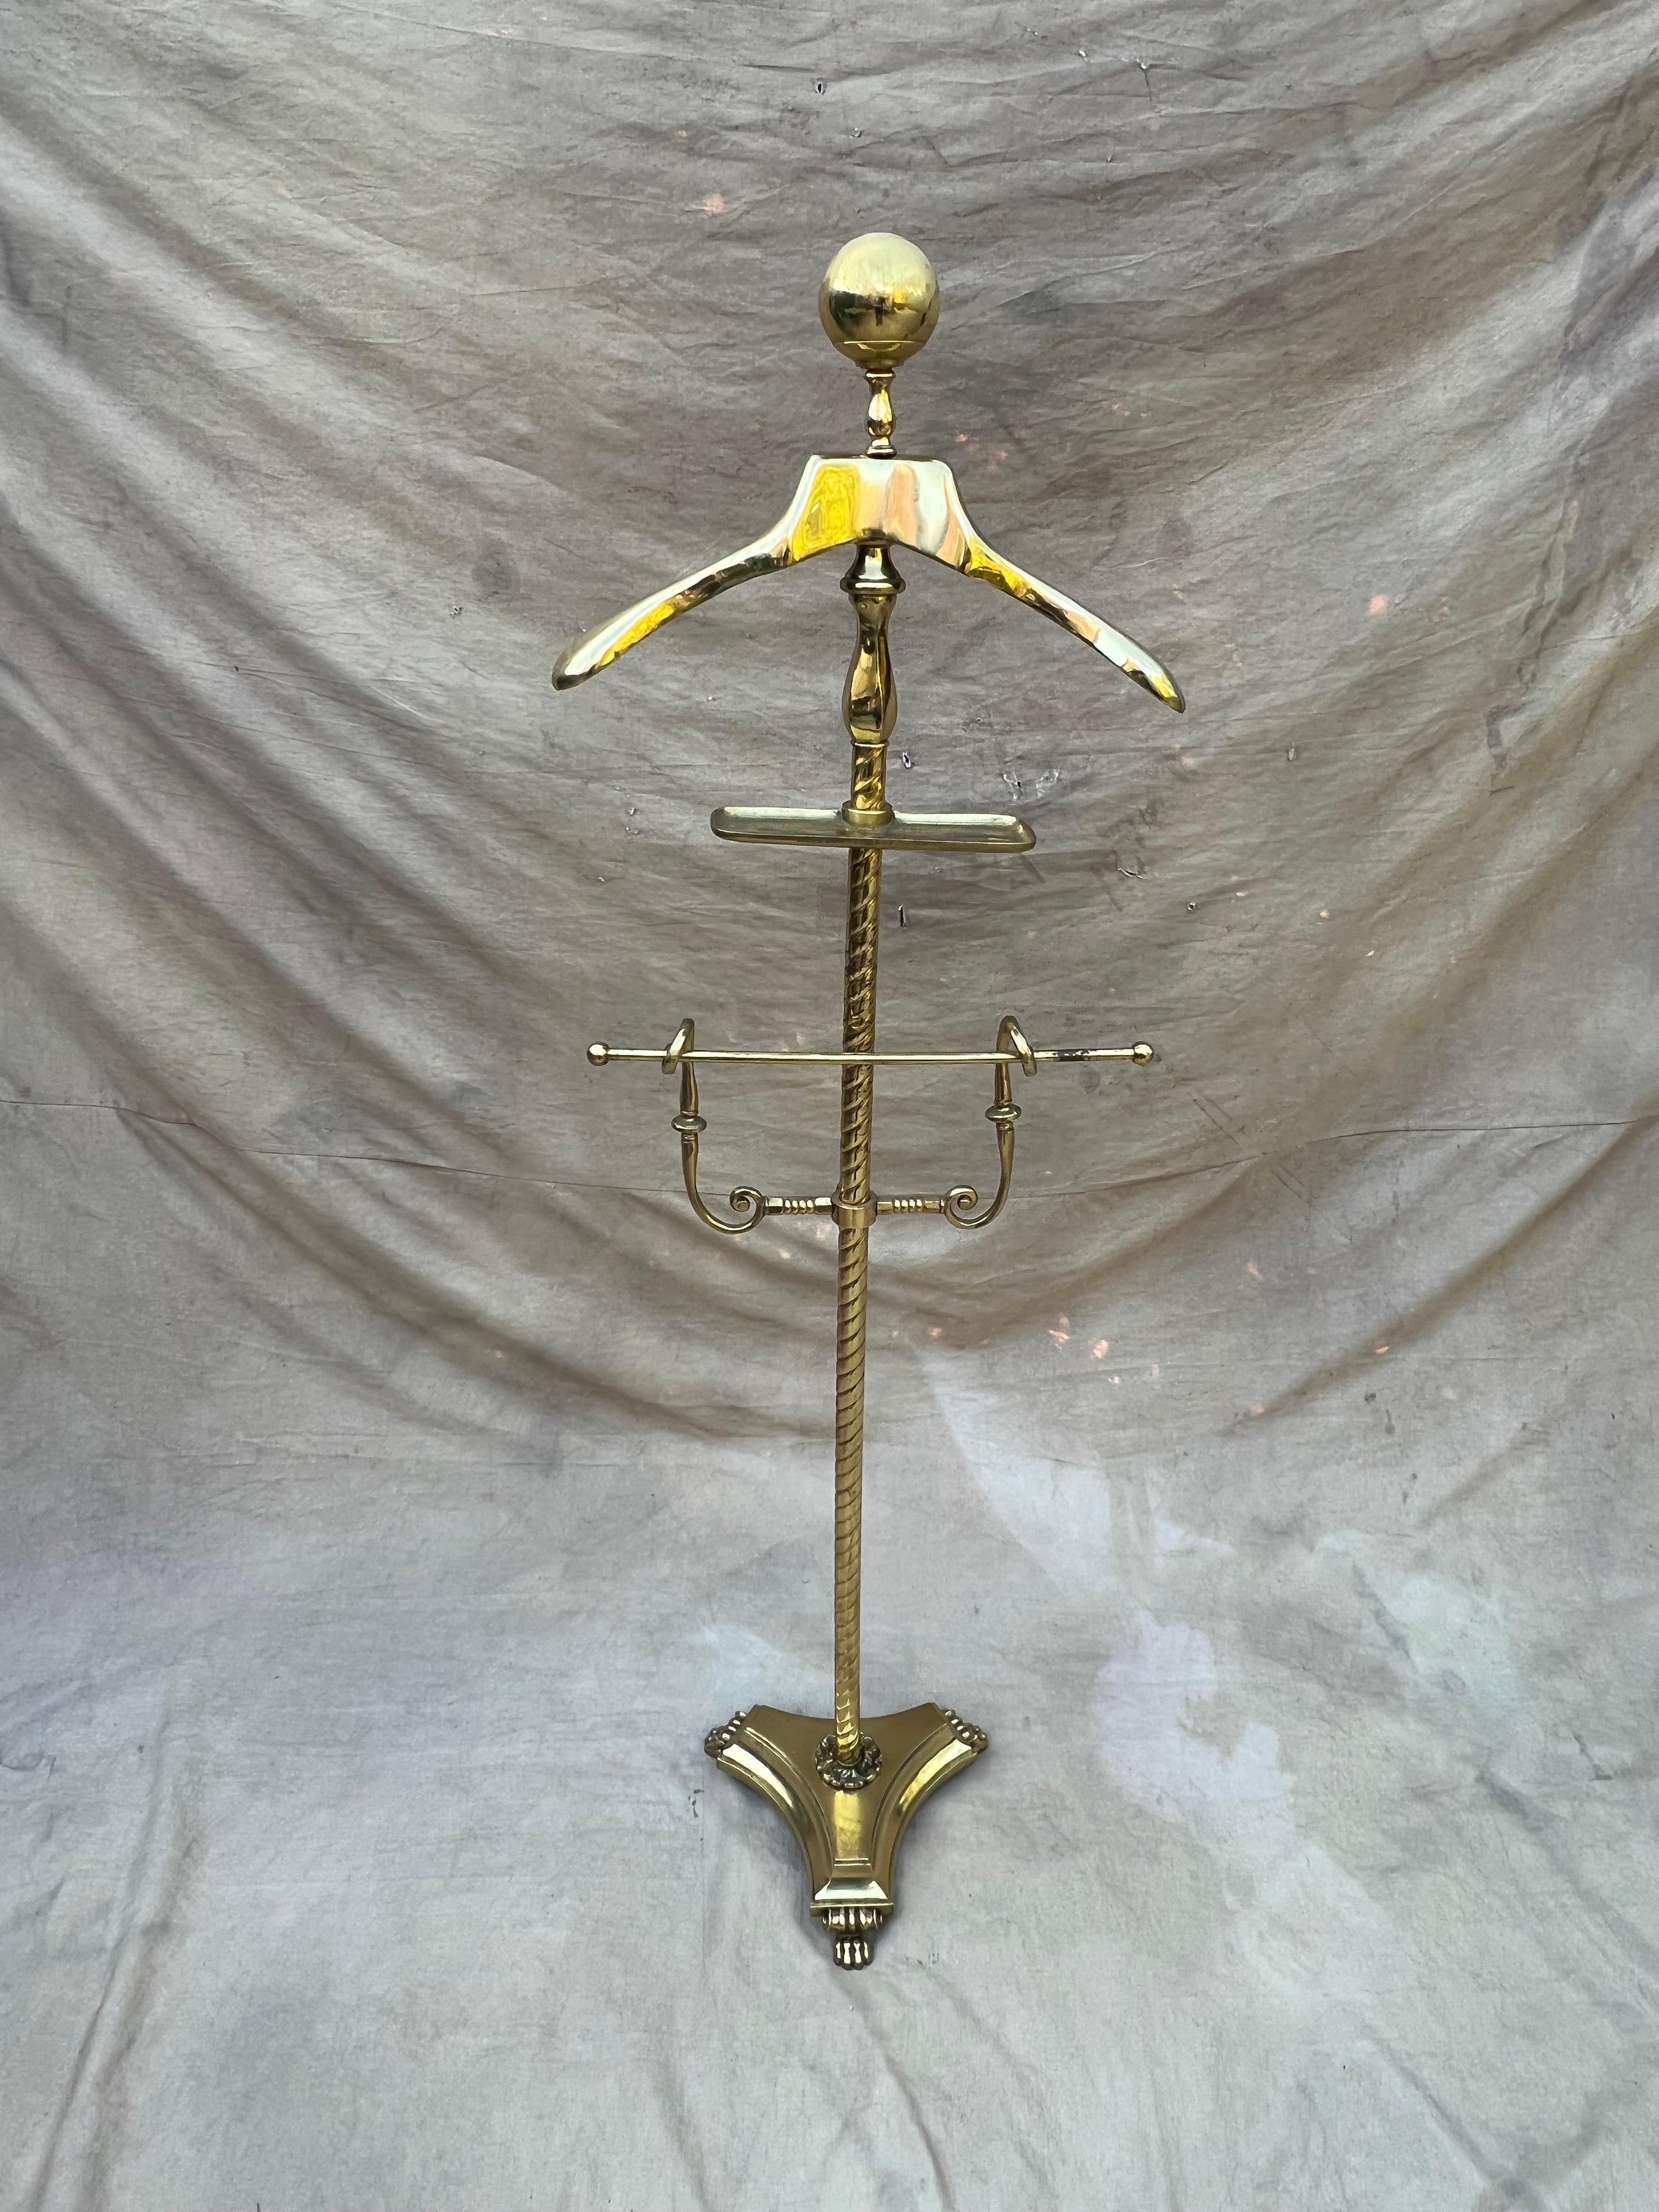 A wonderful brass valet with a unique and heavy base. We have never seen one with a more solid base with lion feet - very nice. Holds a jacket, pants and has the necessary platform for change, wallet, keys, etc. 

A compliment to any dressing